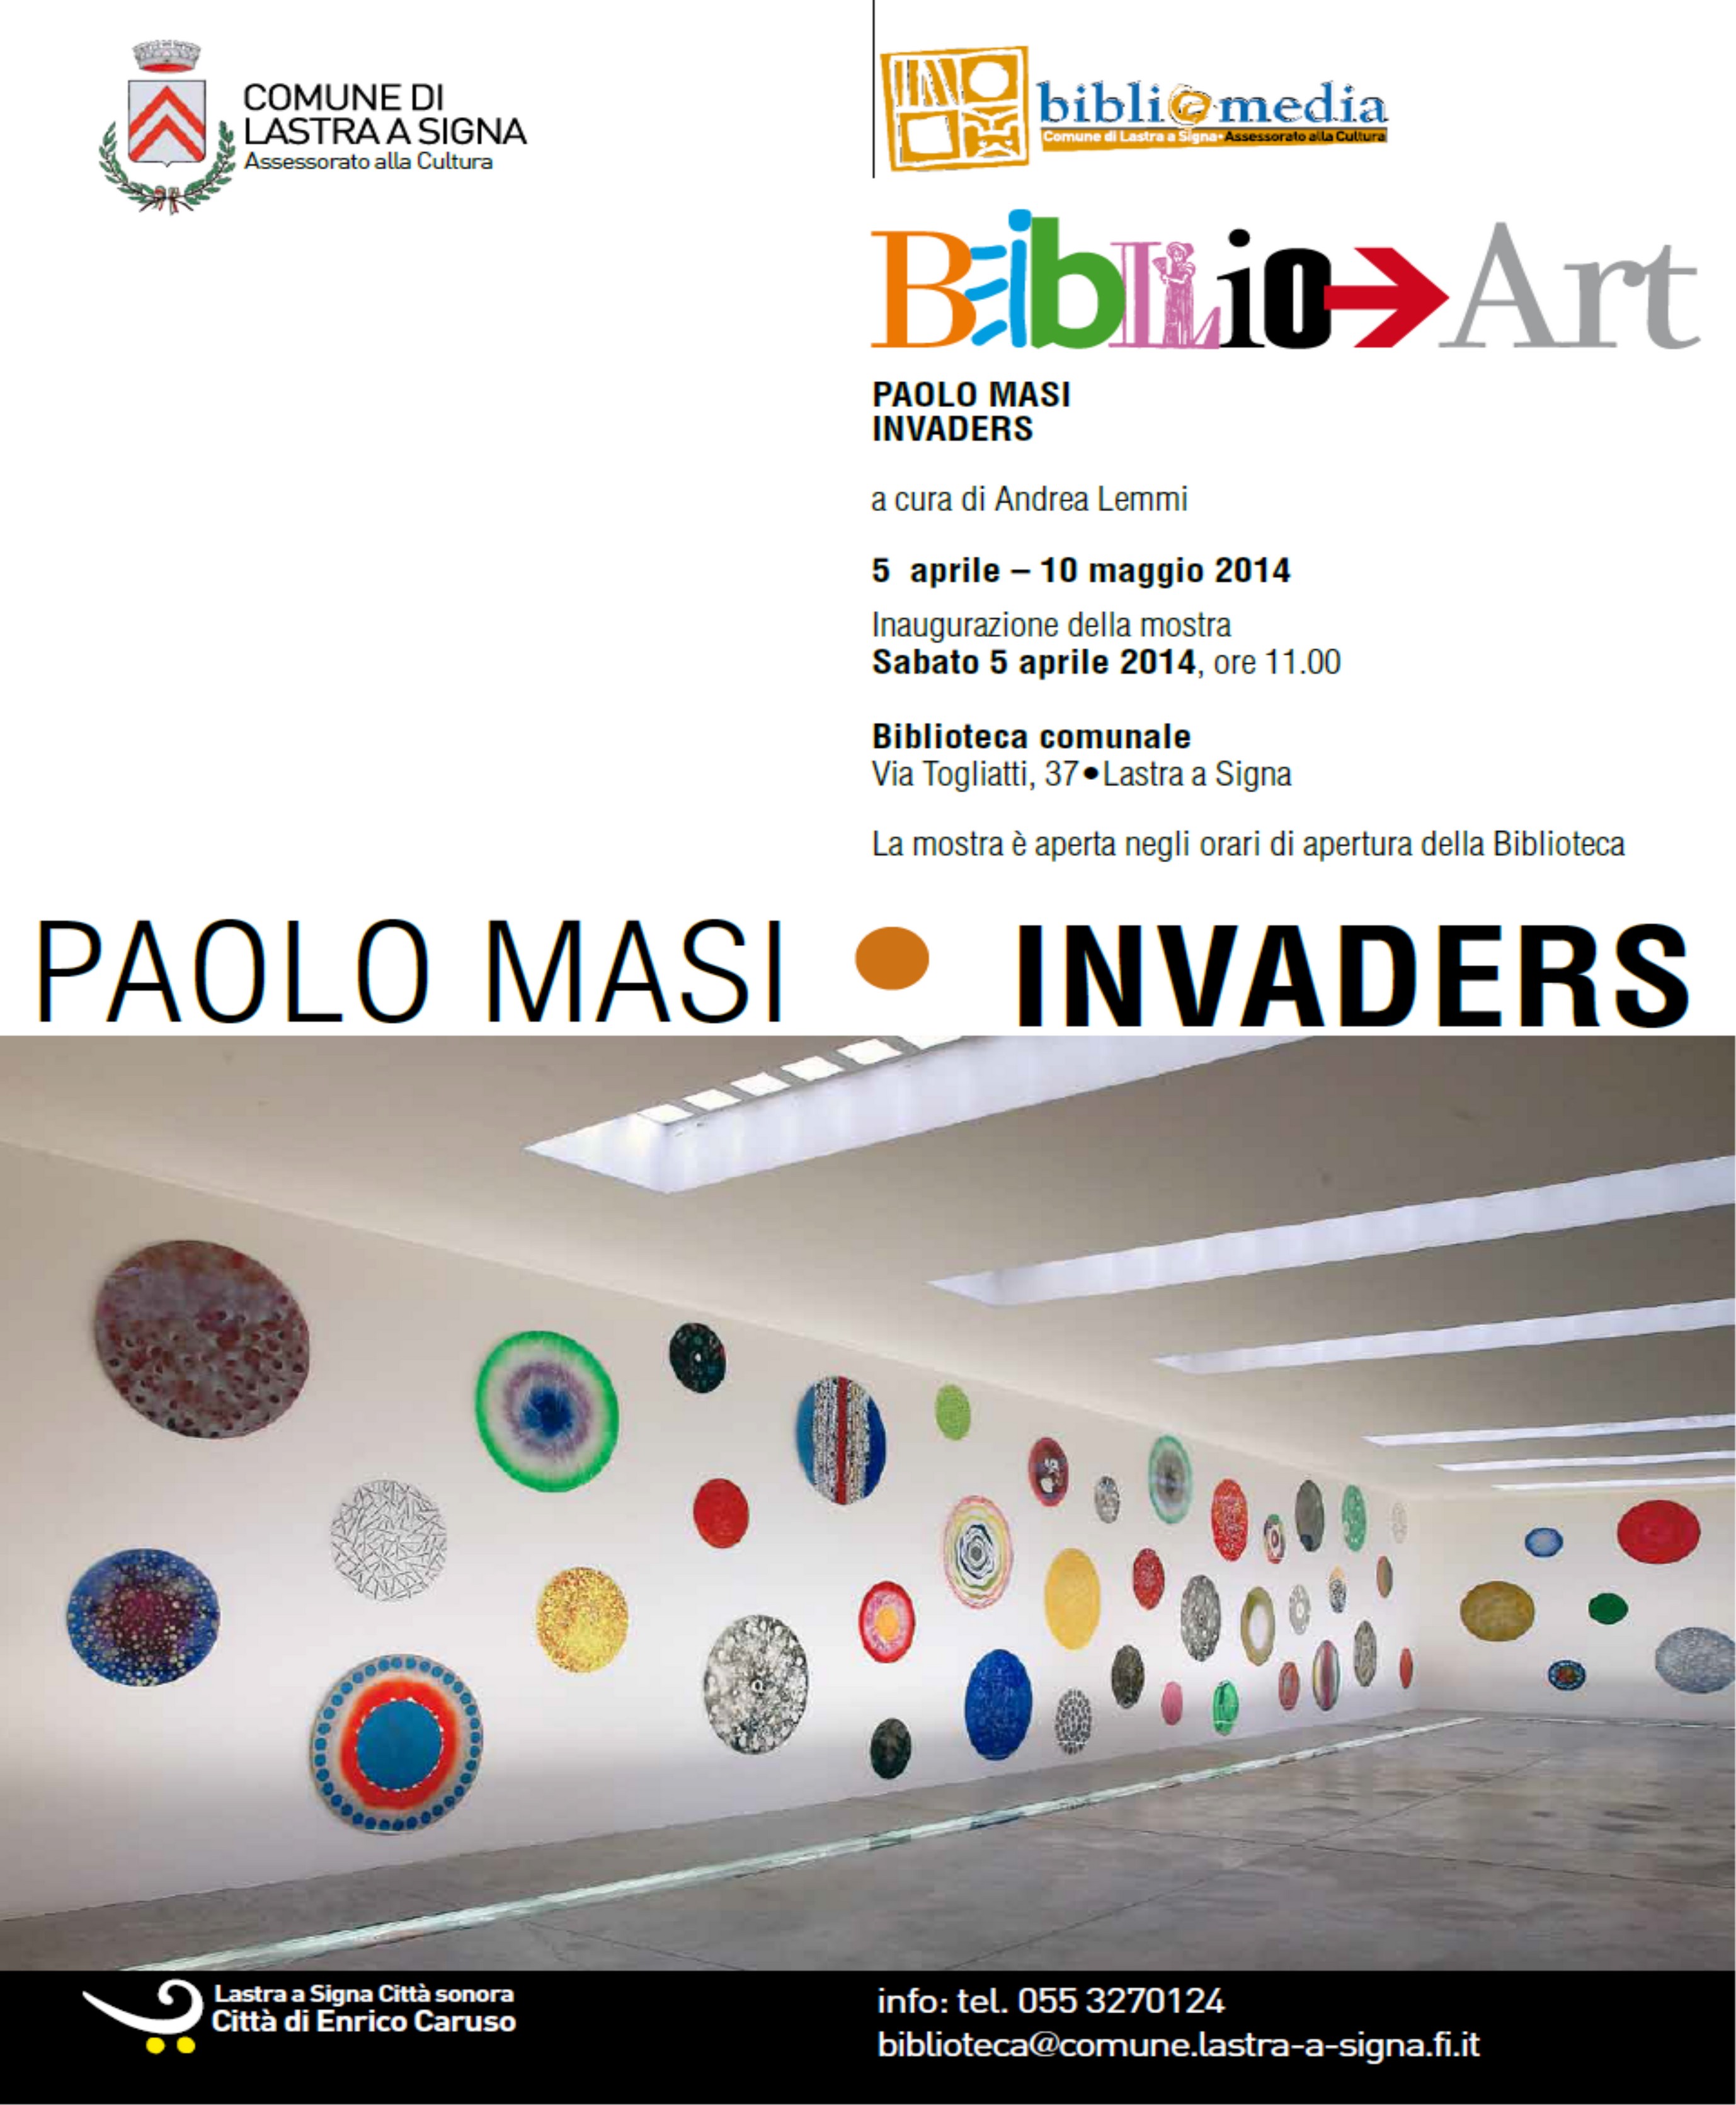 Paolo Masi - "Invaders"